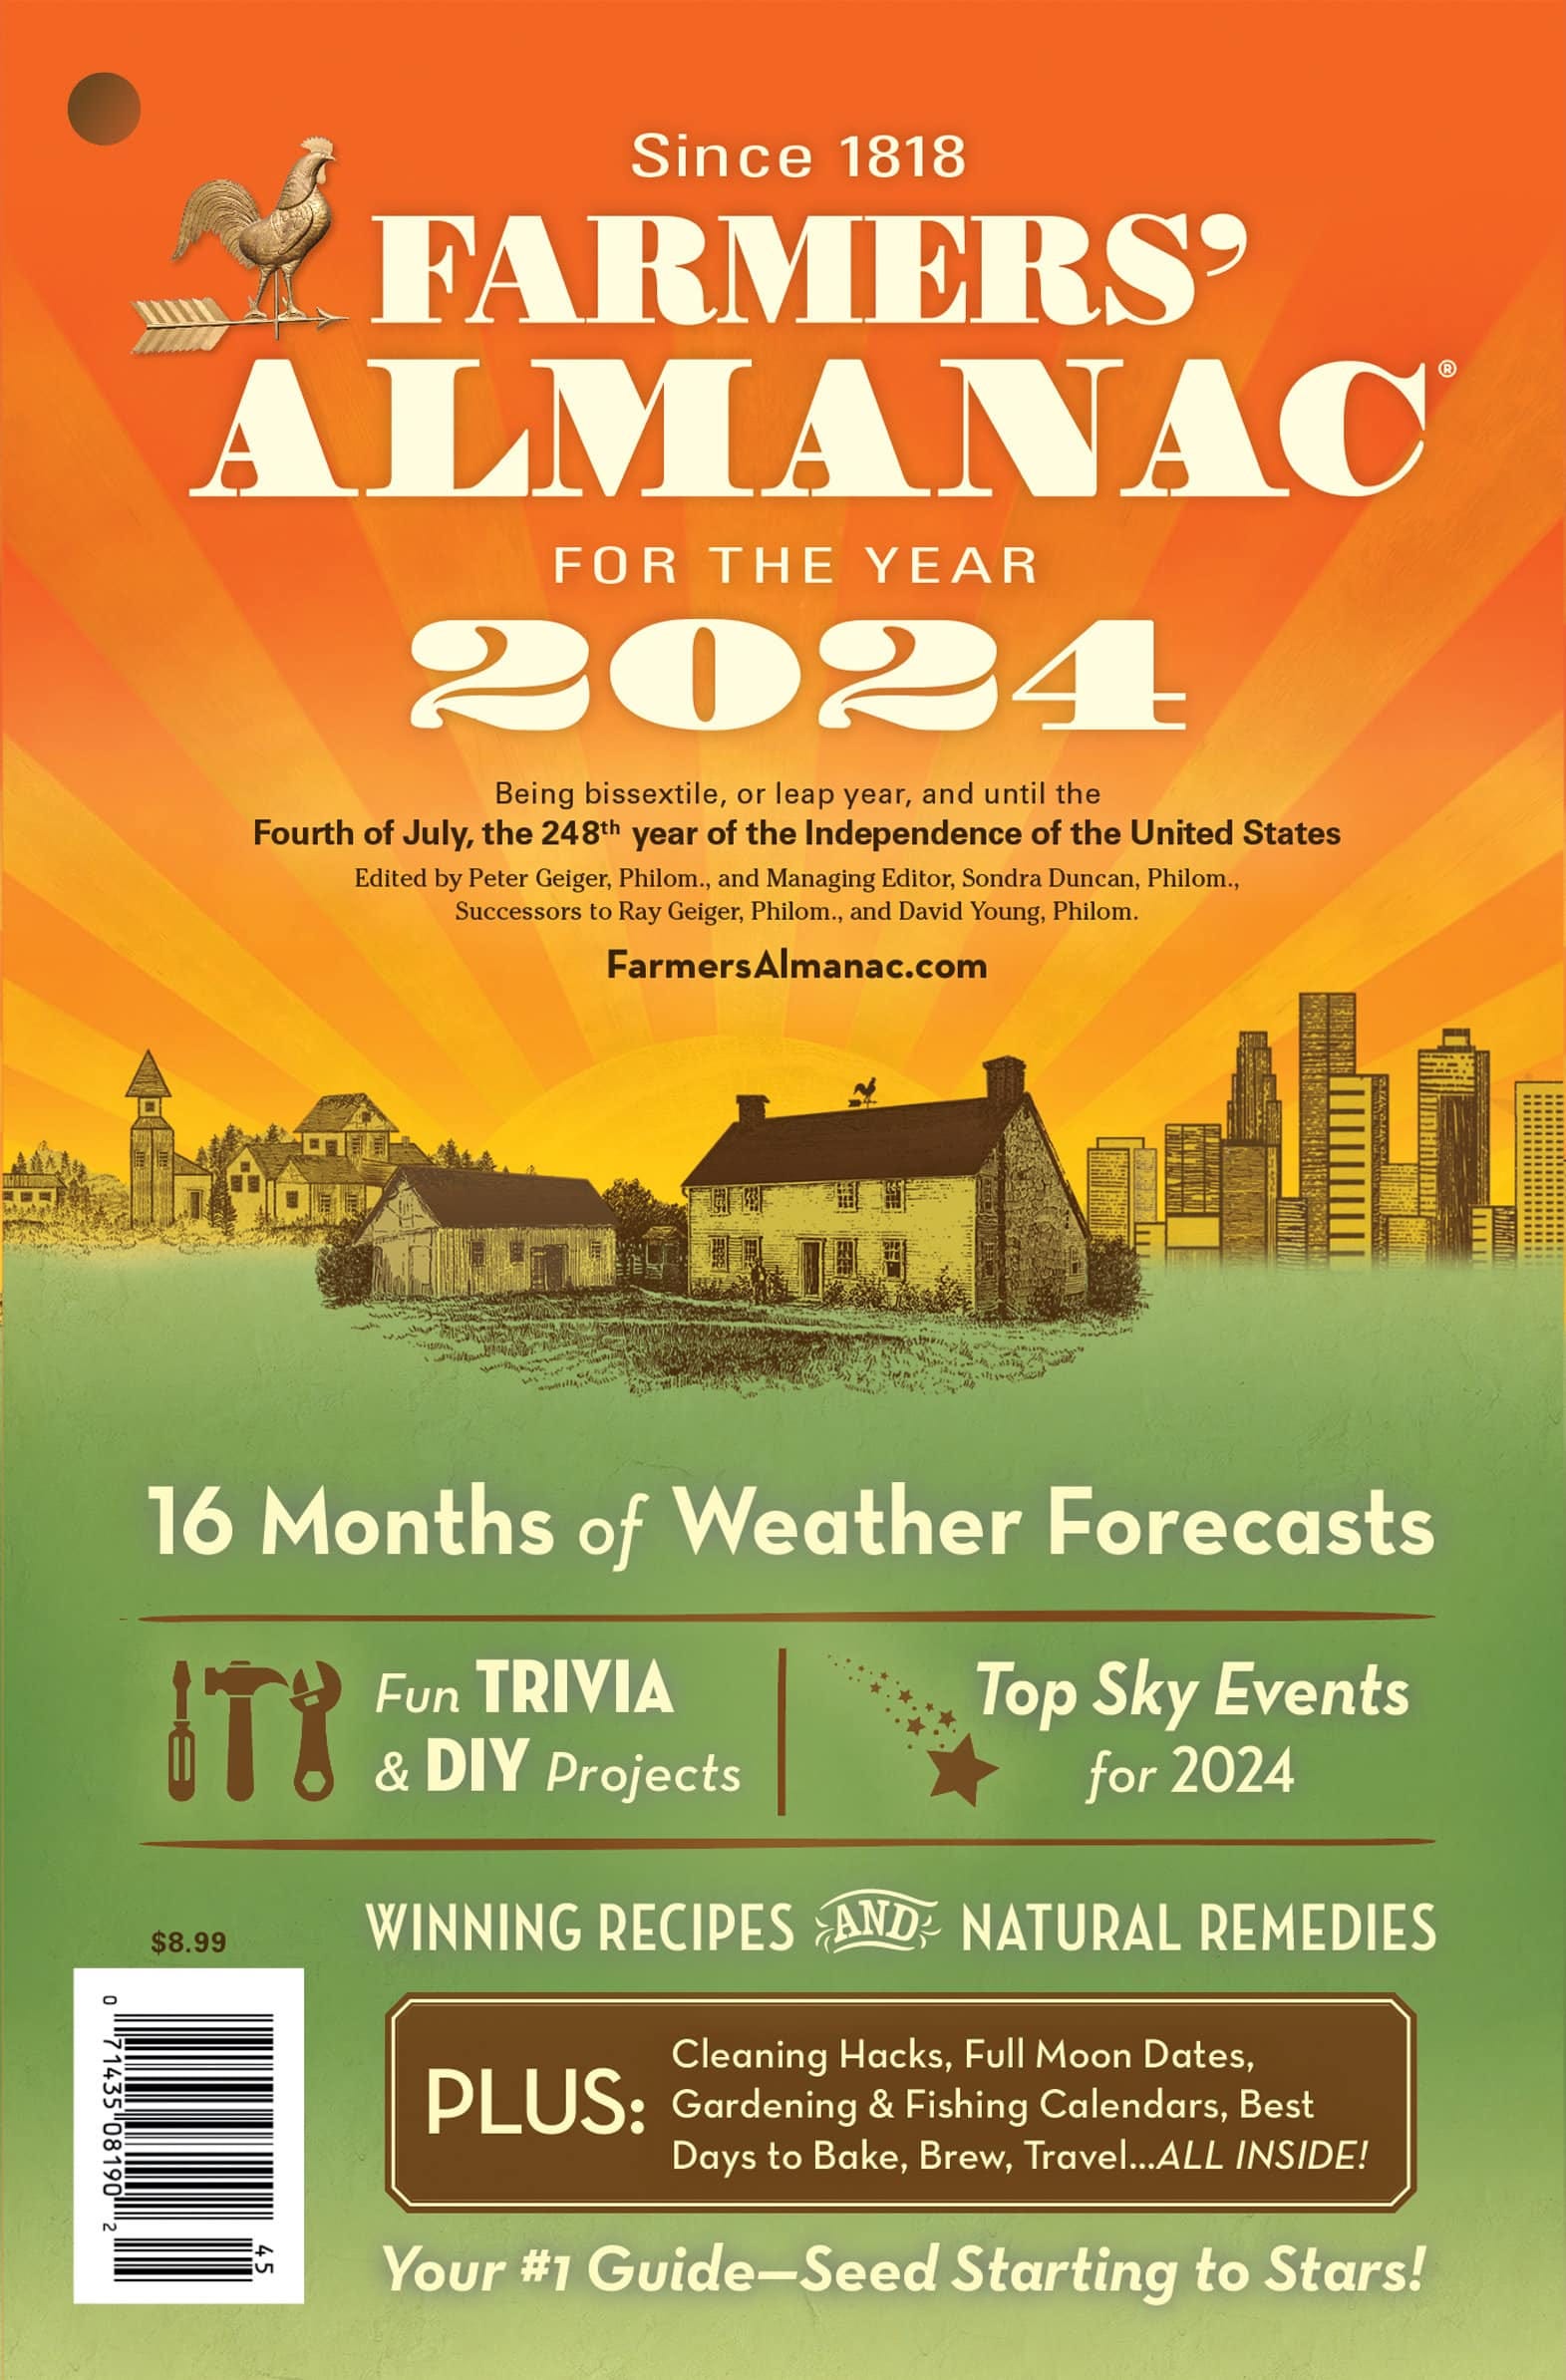 Farmers’ Almanac on winter 20232024 ‘Brrr’ with more snow, cold